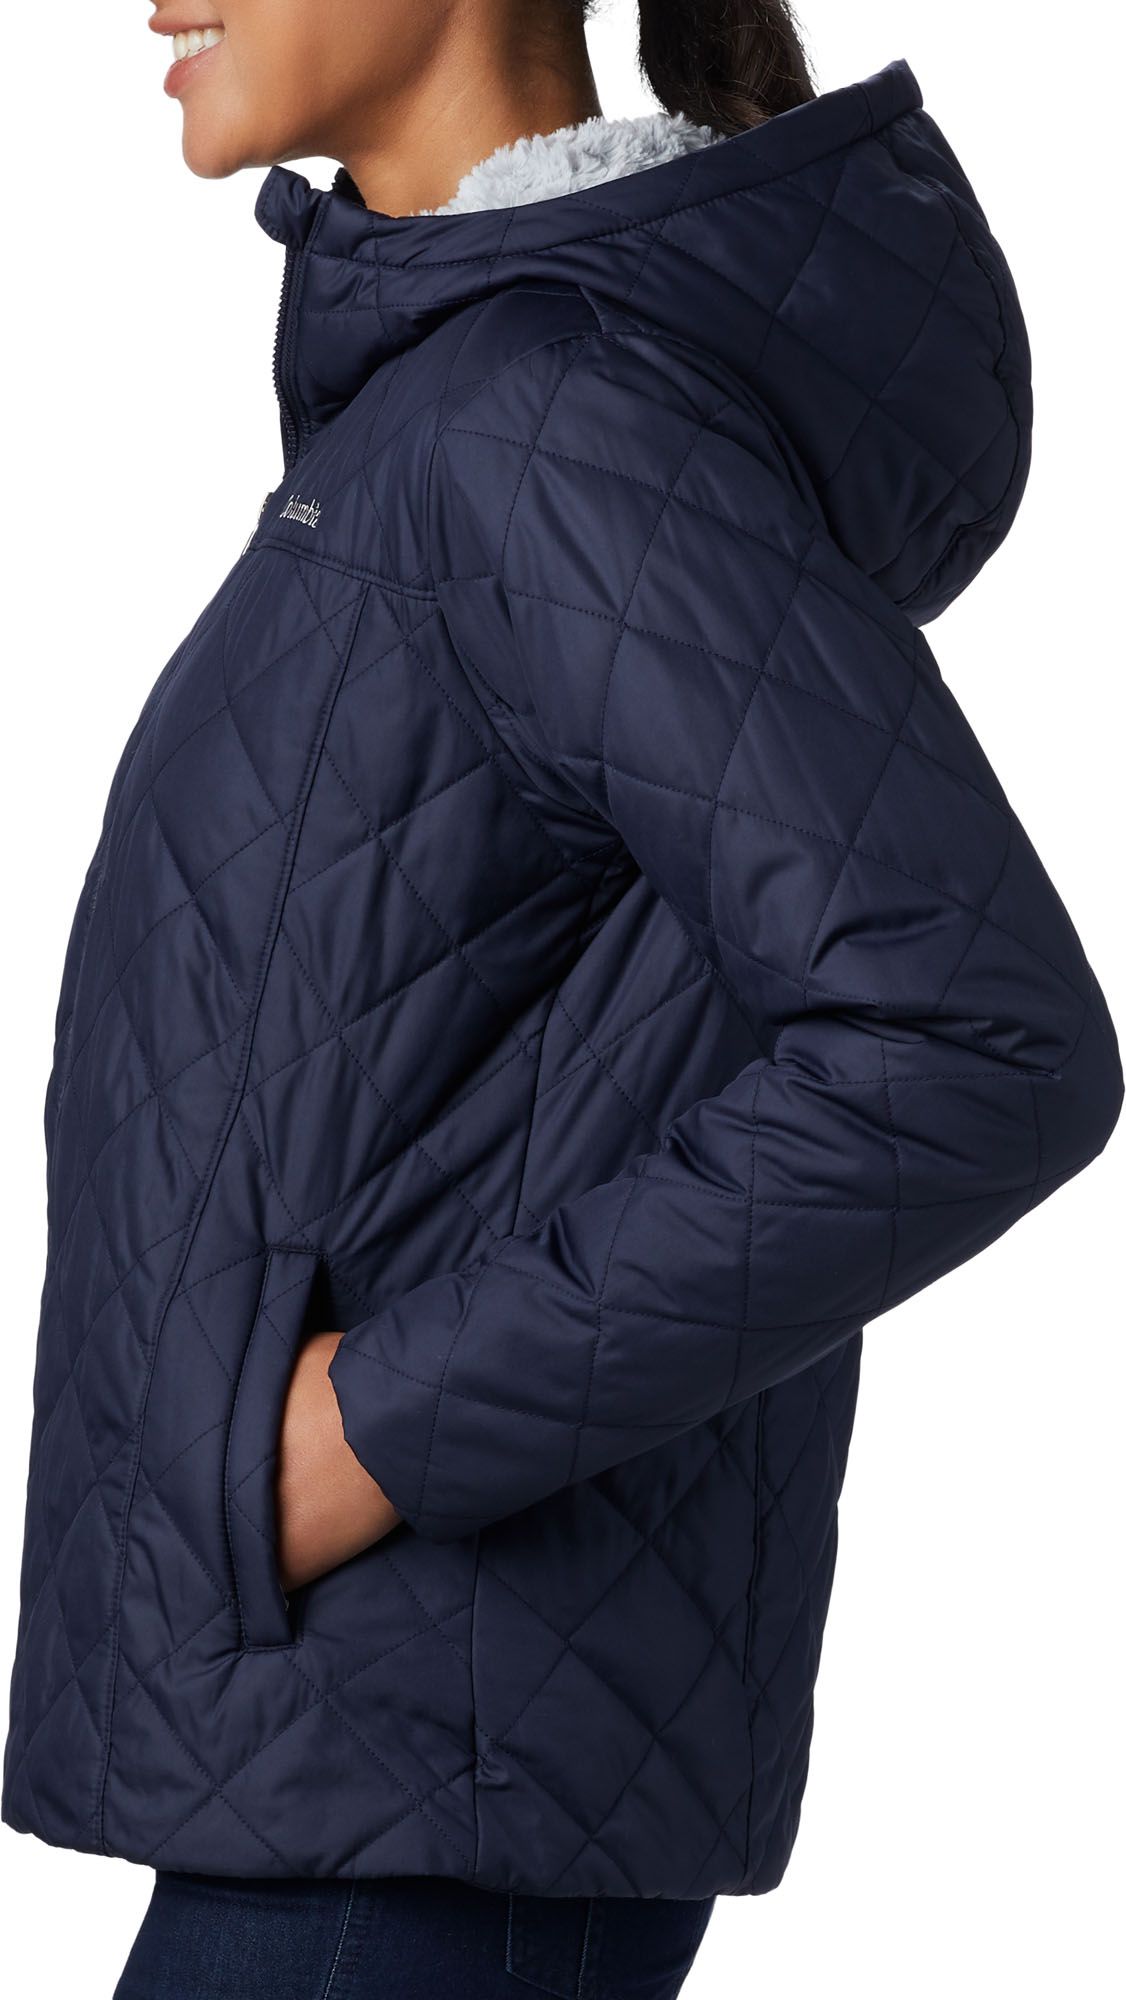 columbia copper crest hooded quilted jacket